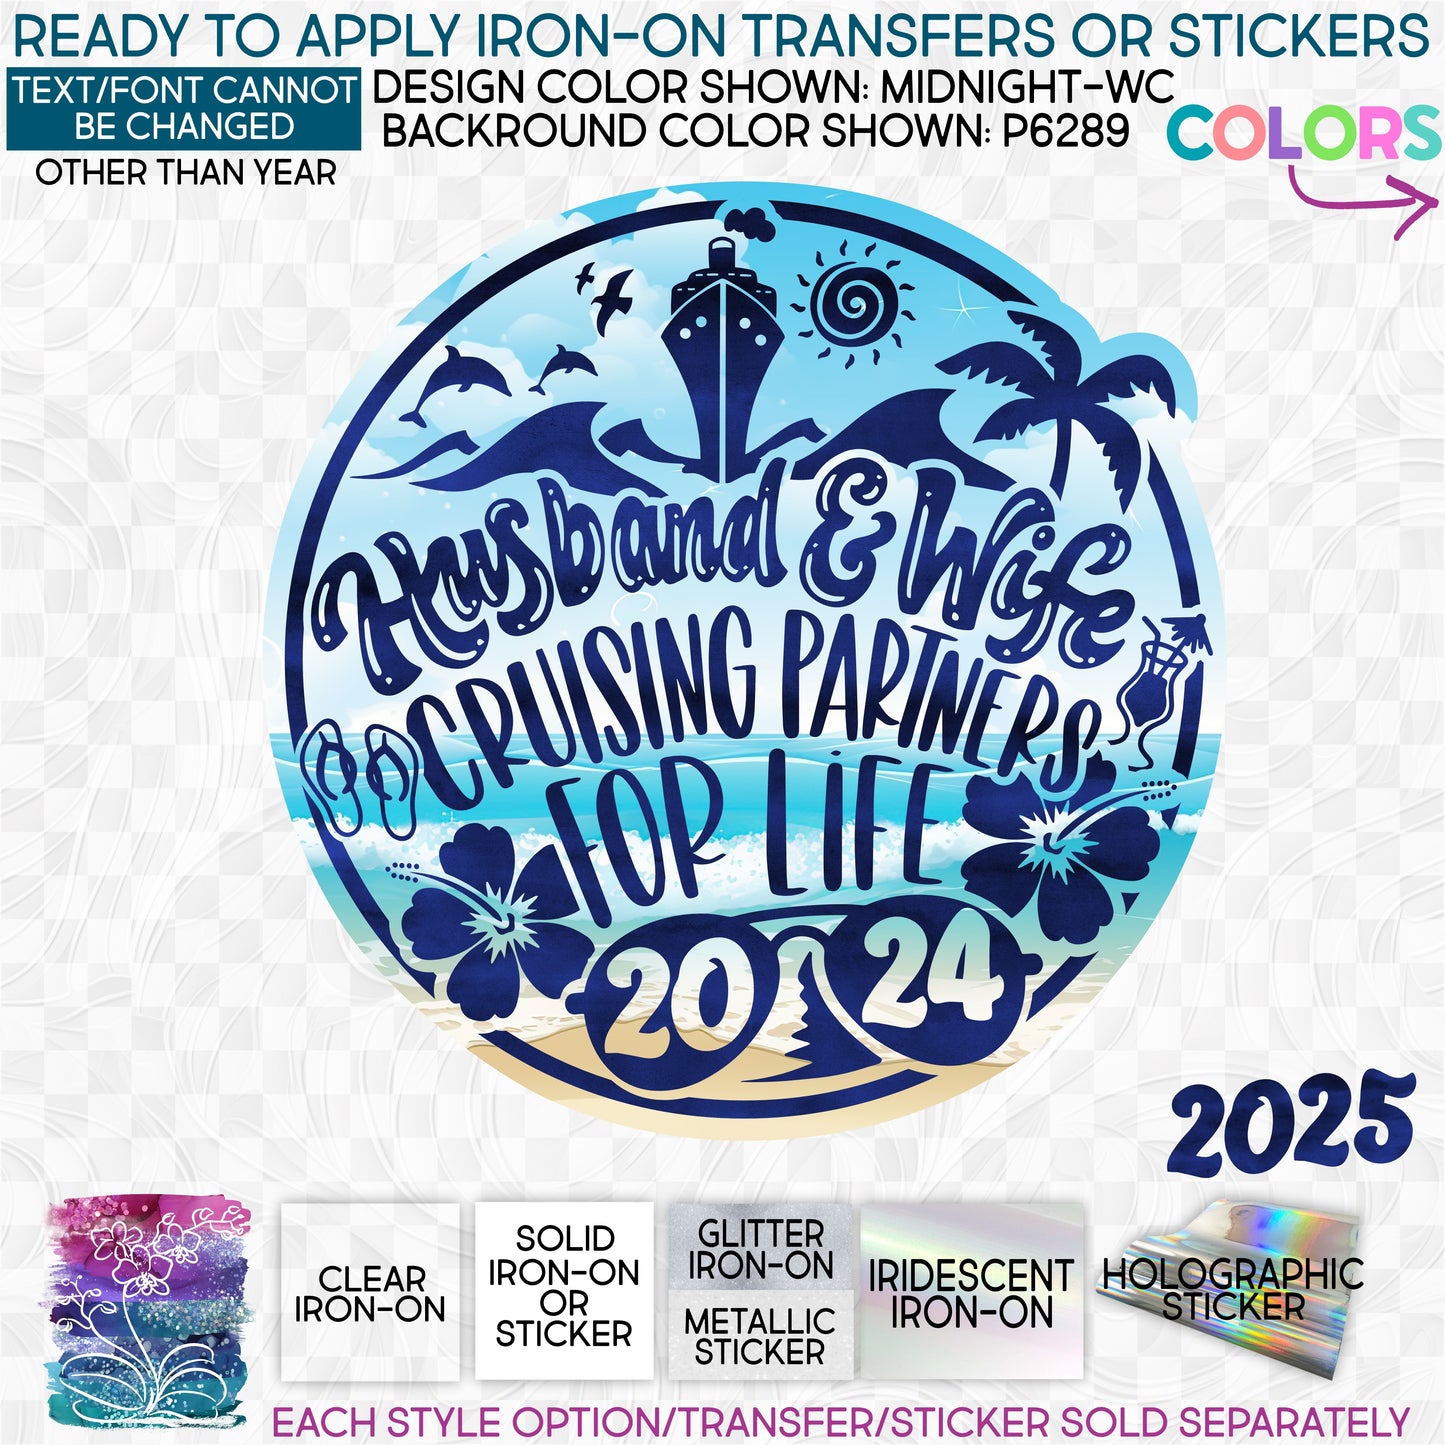 SBS-329-O Husband & Wife Cruising Partners for Life 2023 2024 Any Year Custom Printed Iron On Transfer or Sticker